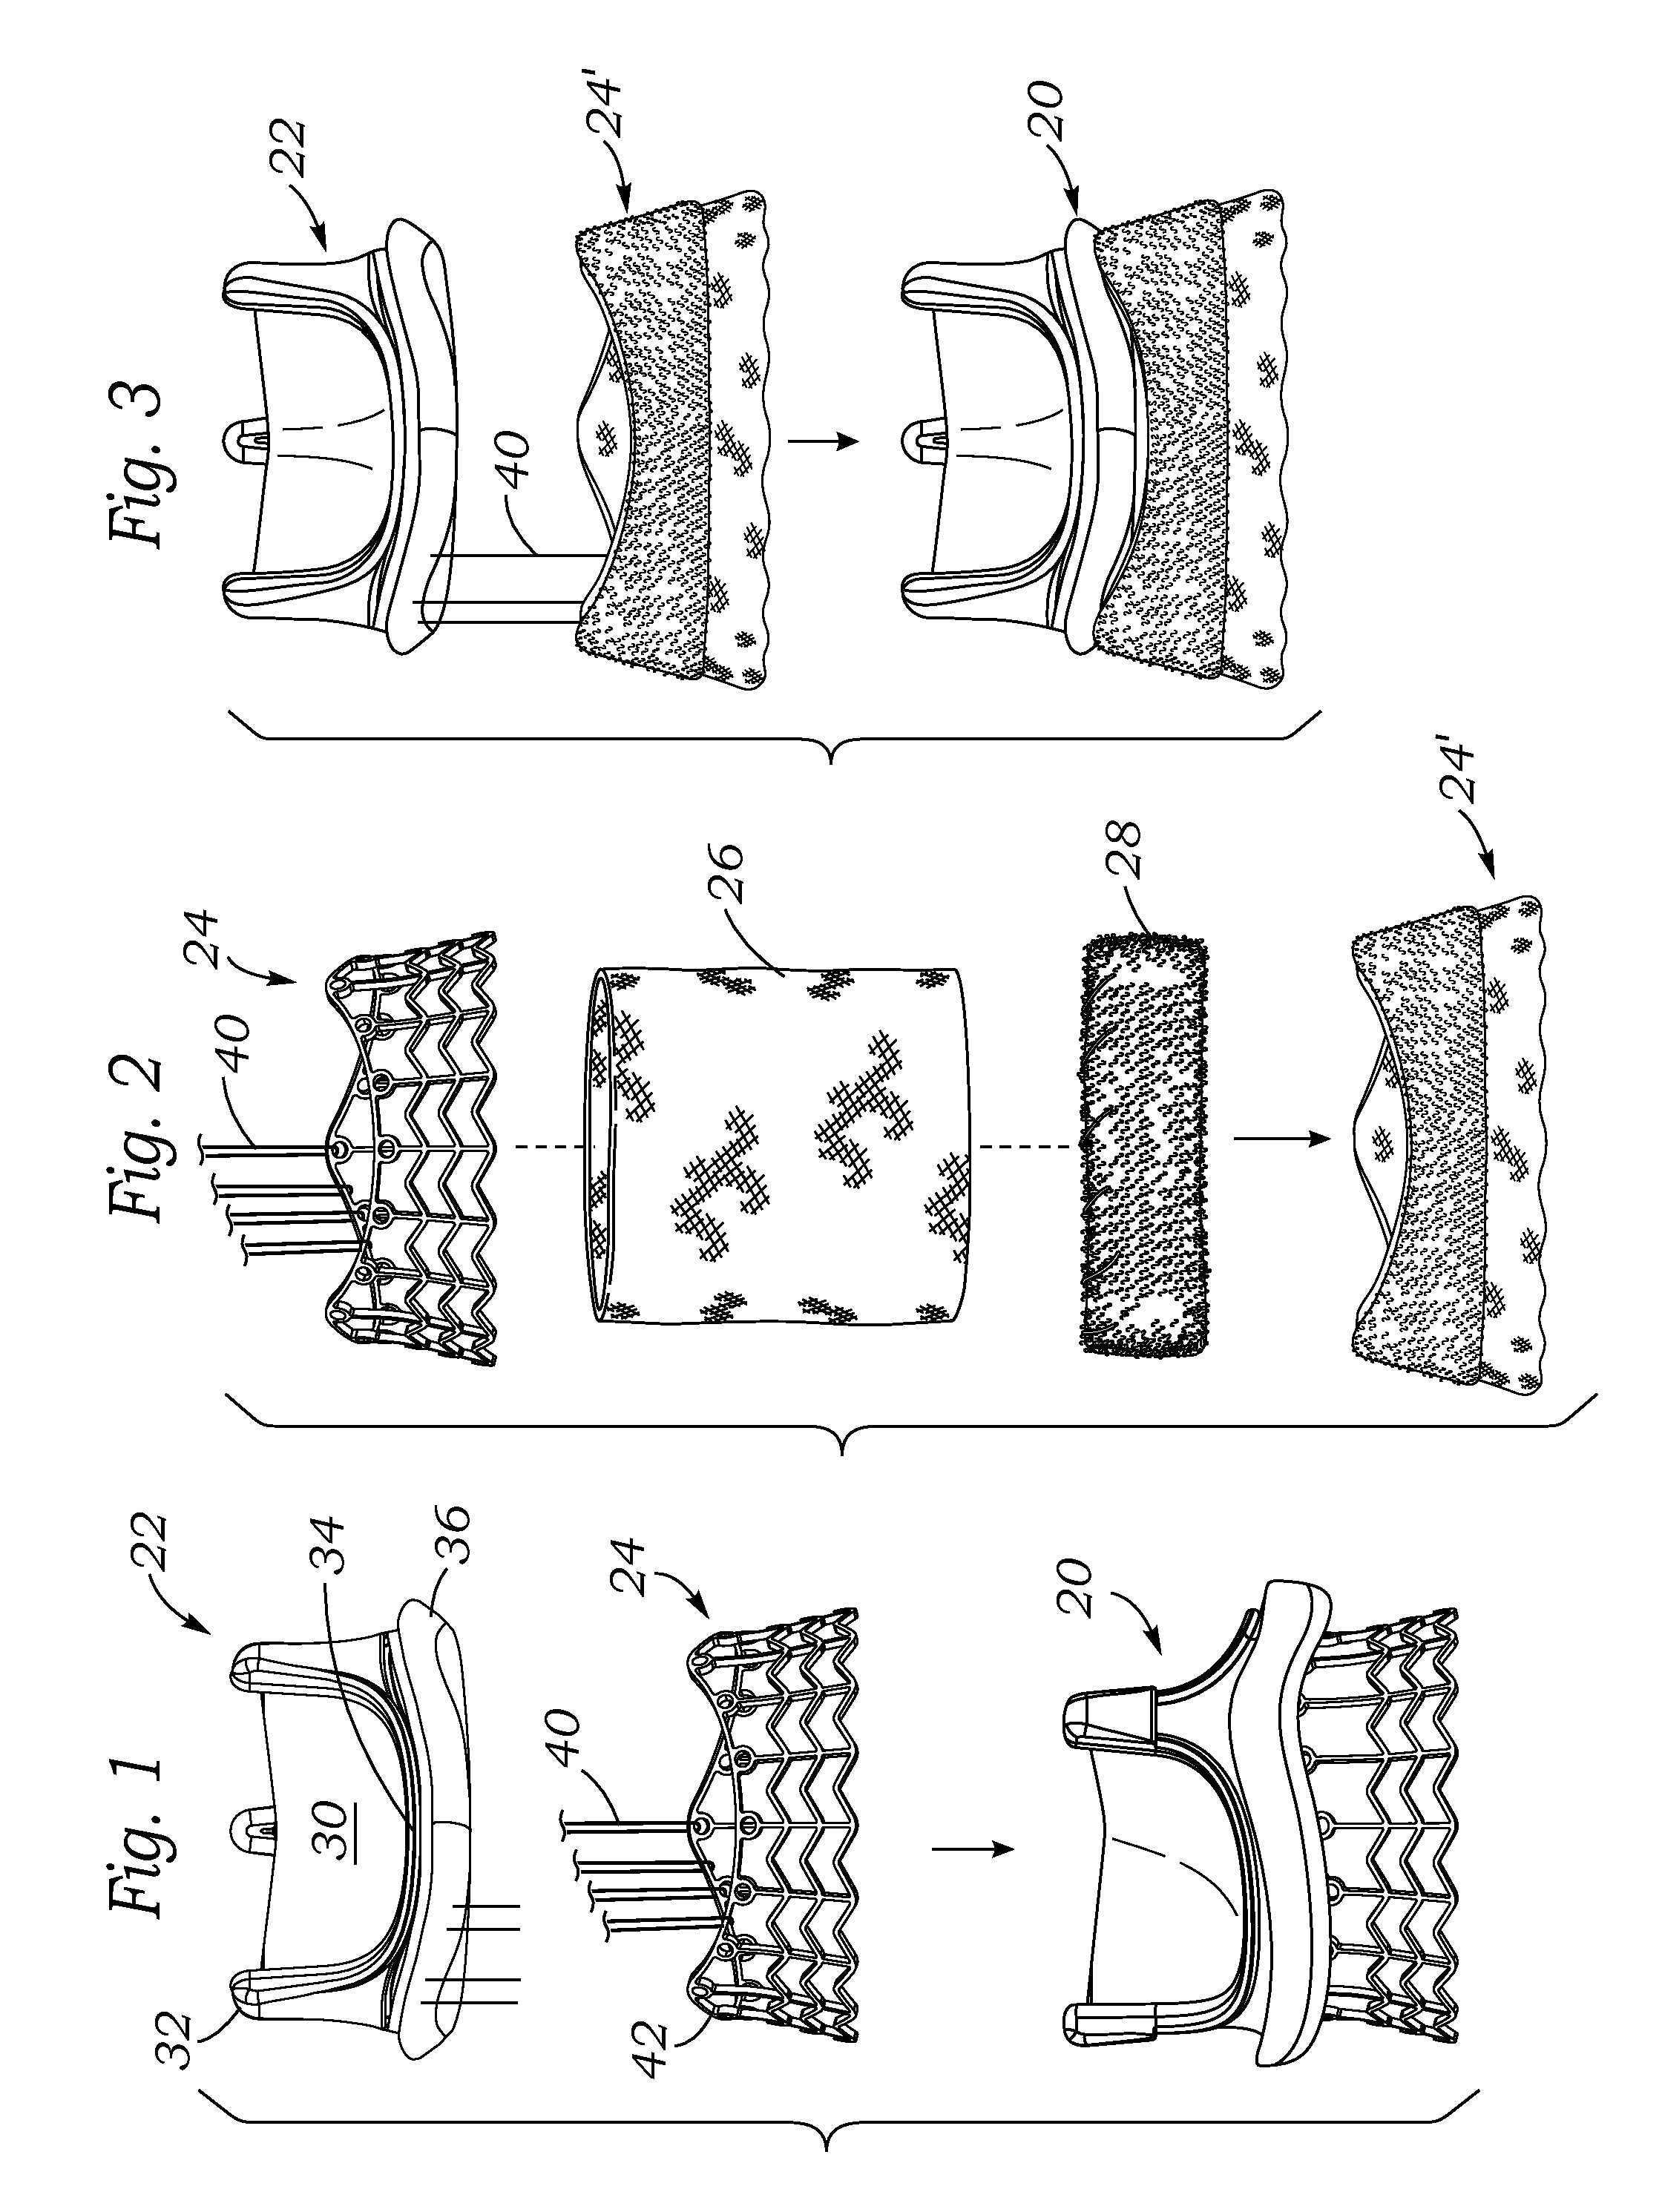 Holder and deployment system for surgical heart valves